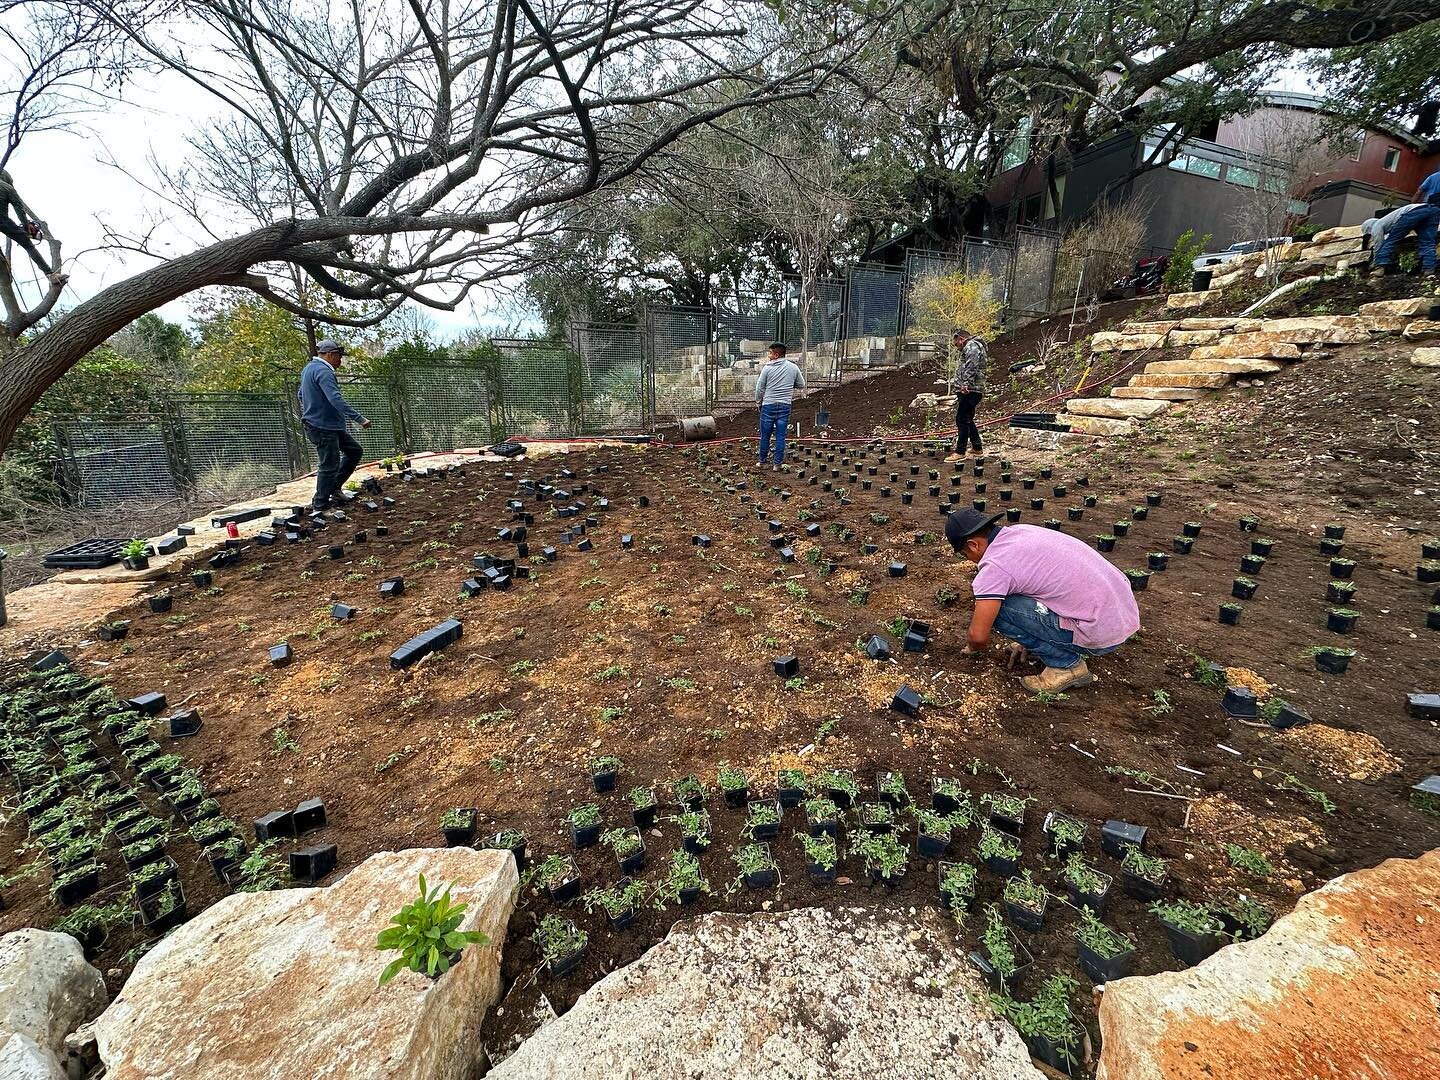 Installing a frog fruit lawn in back to match the one we put in front! We planting 700 plants to cover this large gathering space and swaths of the slope leading down from the upper terrace. The edges are dotted with seasonal flowers and native sedge